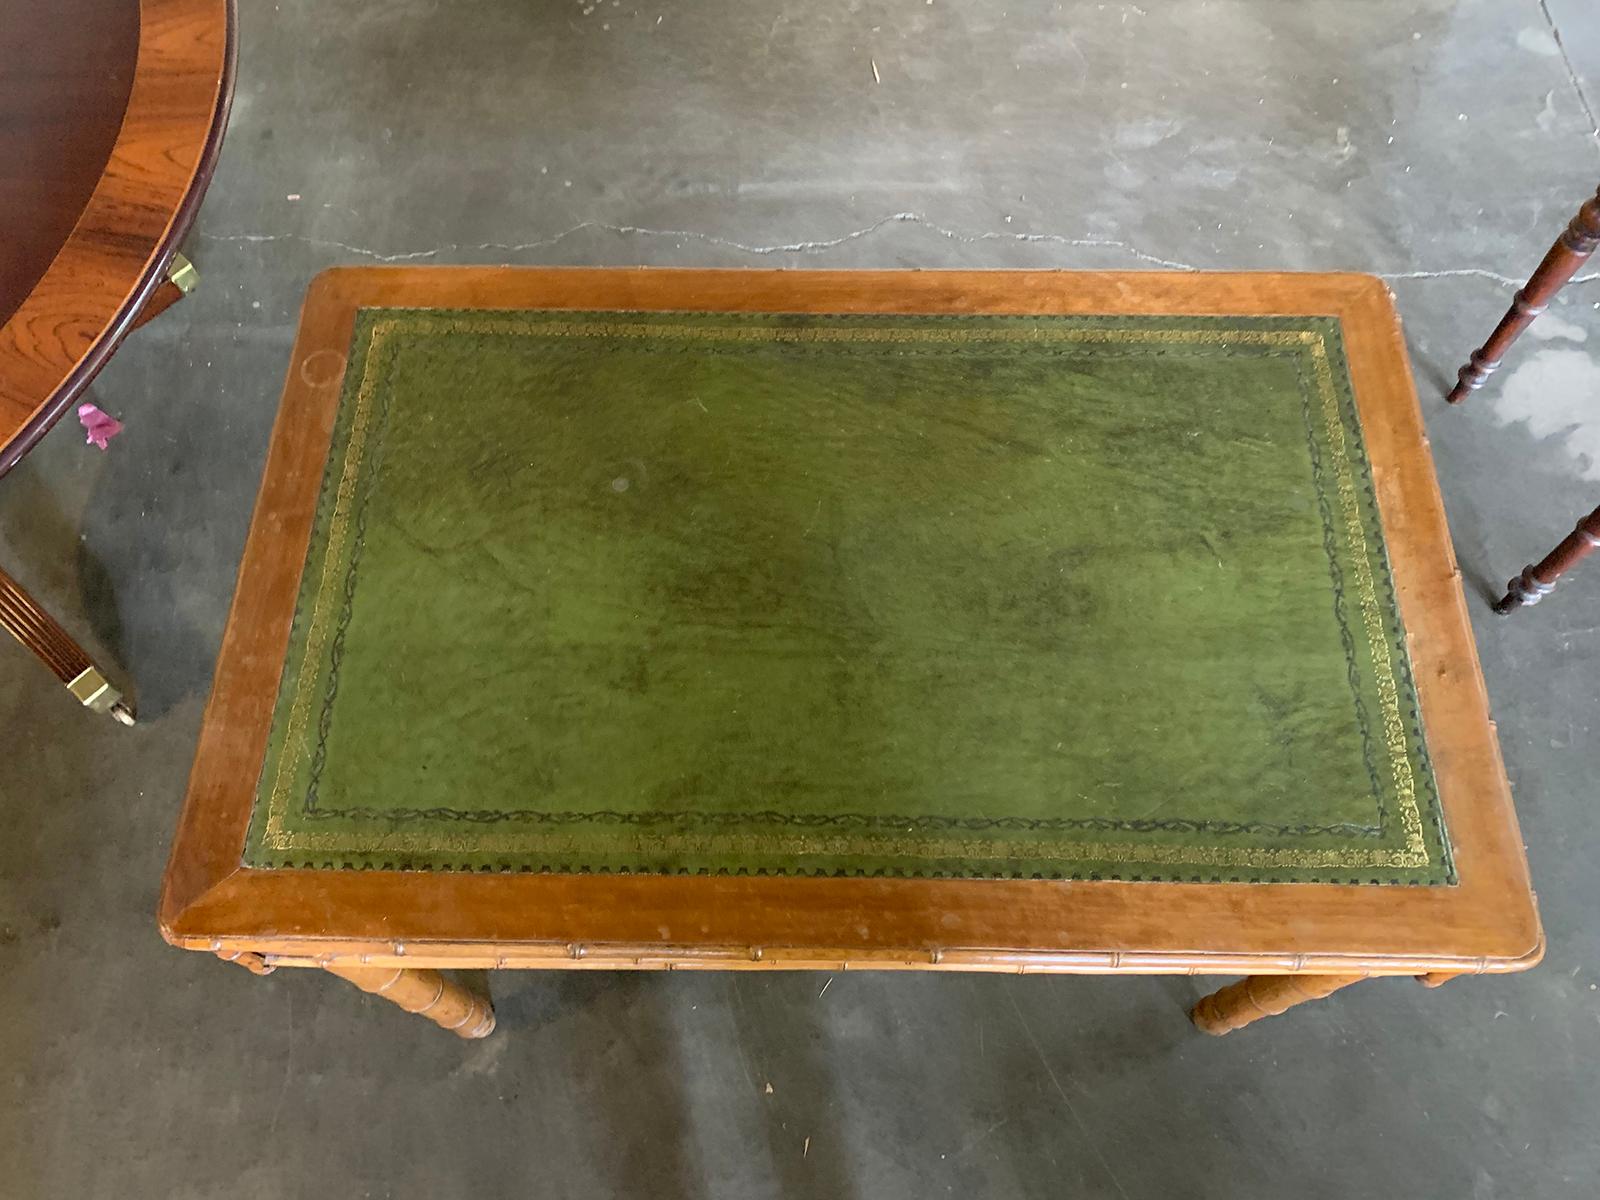 Late 19th-early 20th century English Regency style turned bamboo, green leather top desk with key
39.5